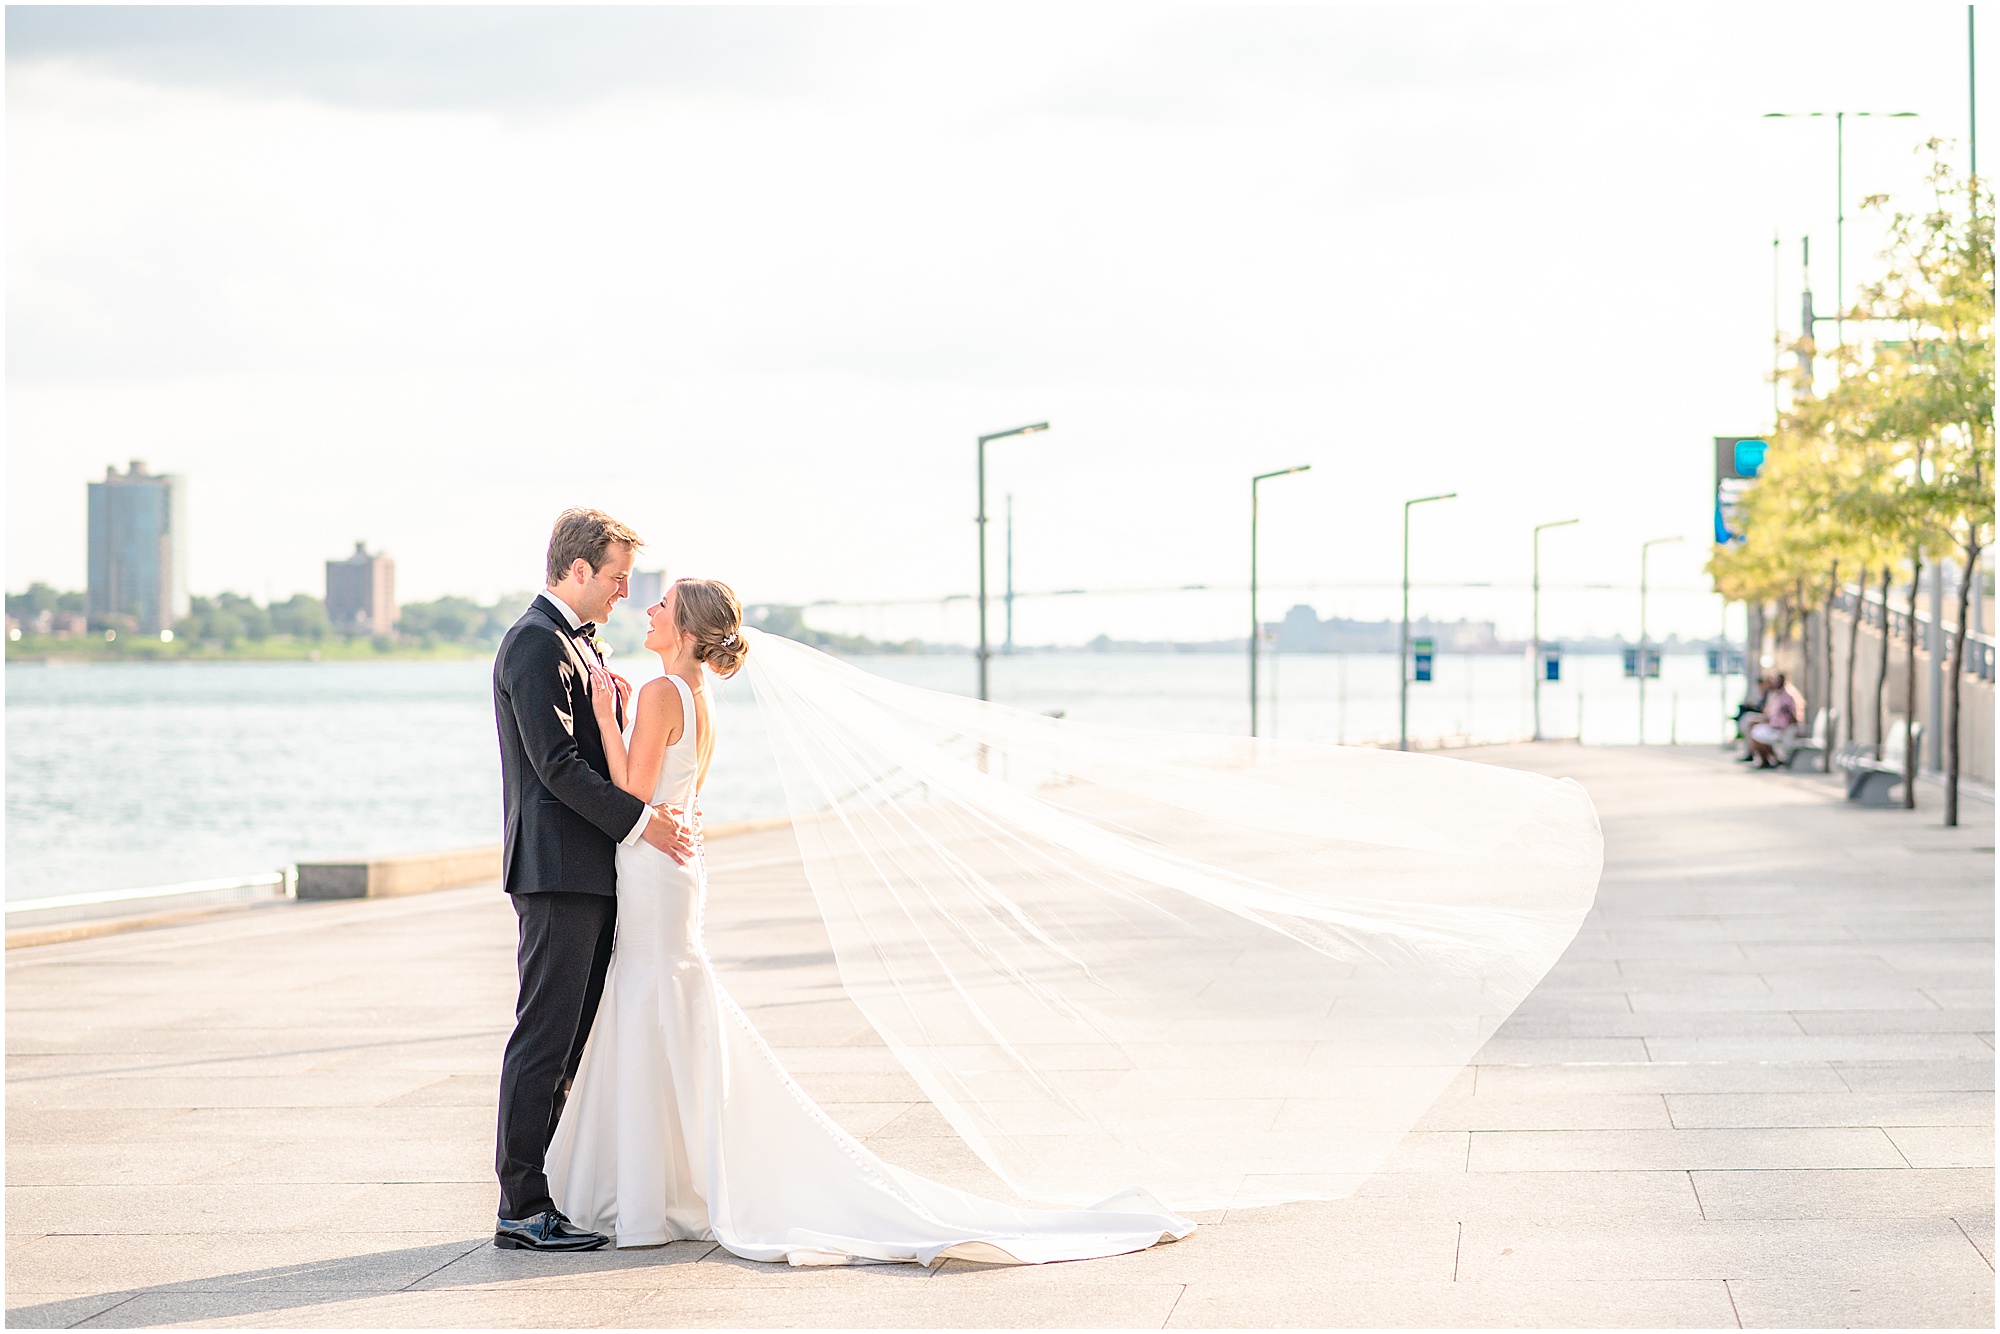 Erin and Christopher at their Waterview Loft wedding in Detroit